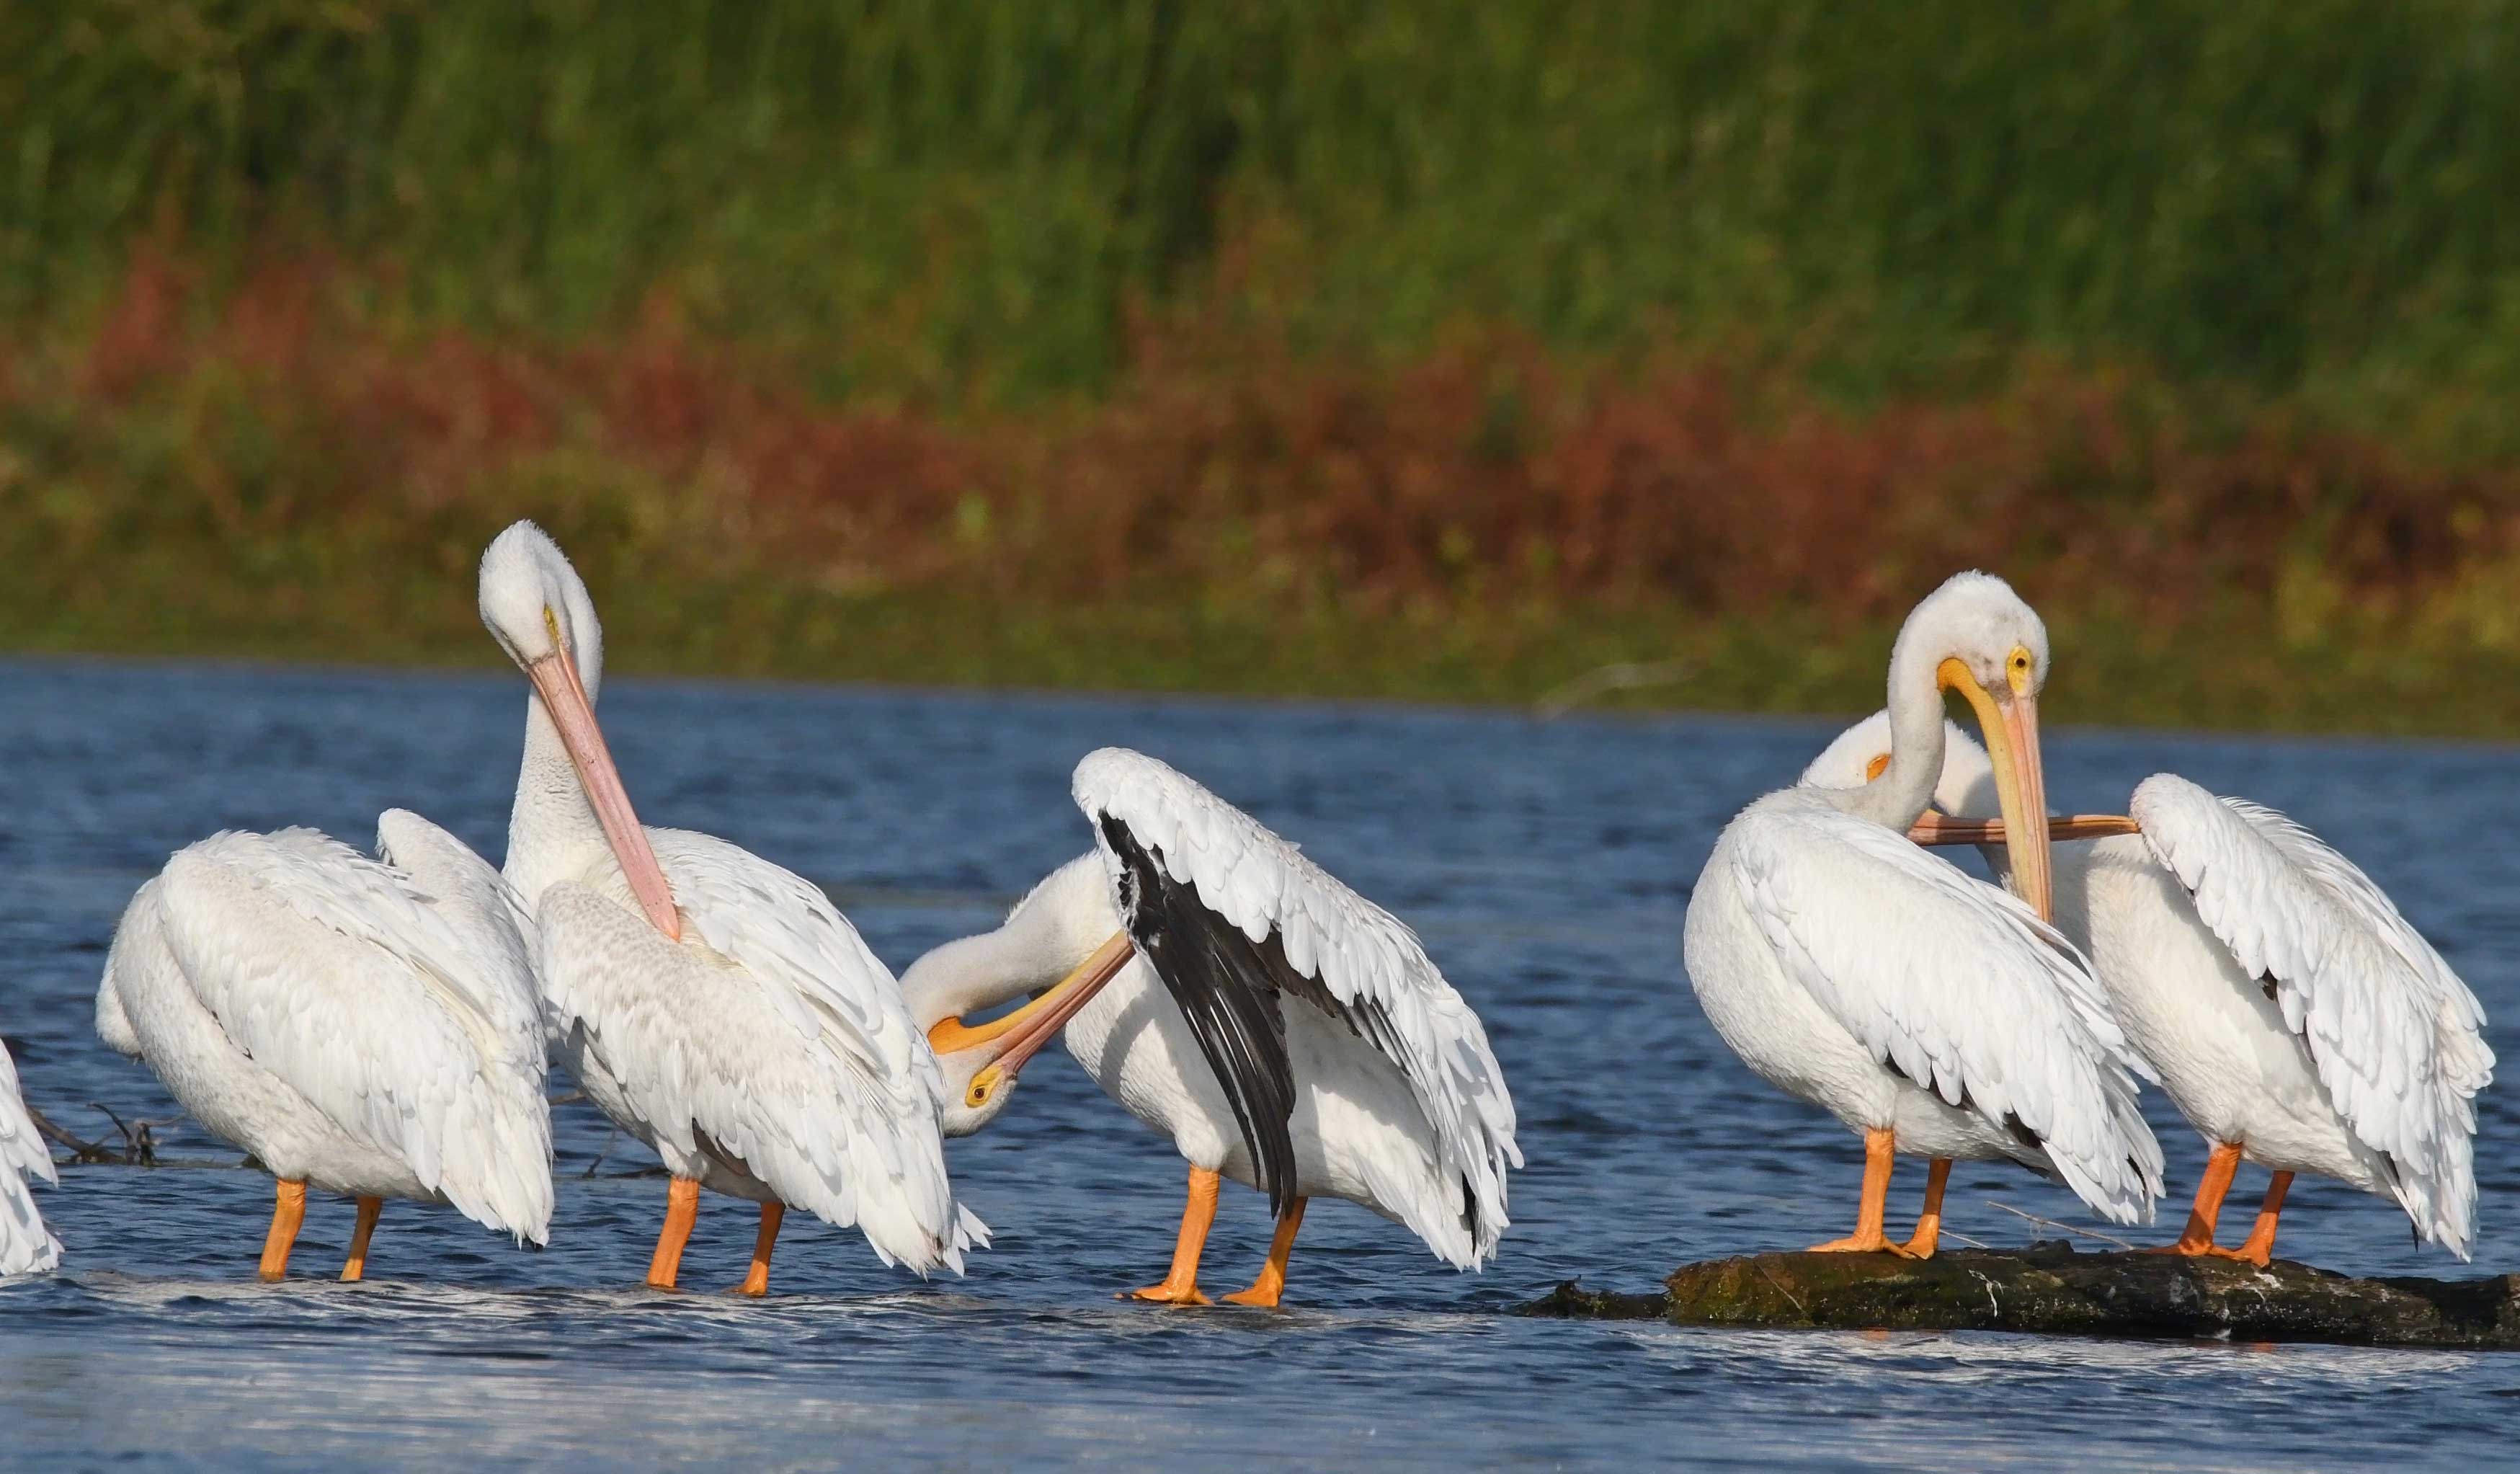 A group of American white pelicans standing in water.